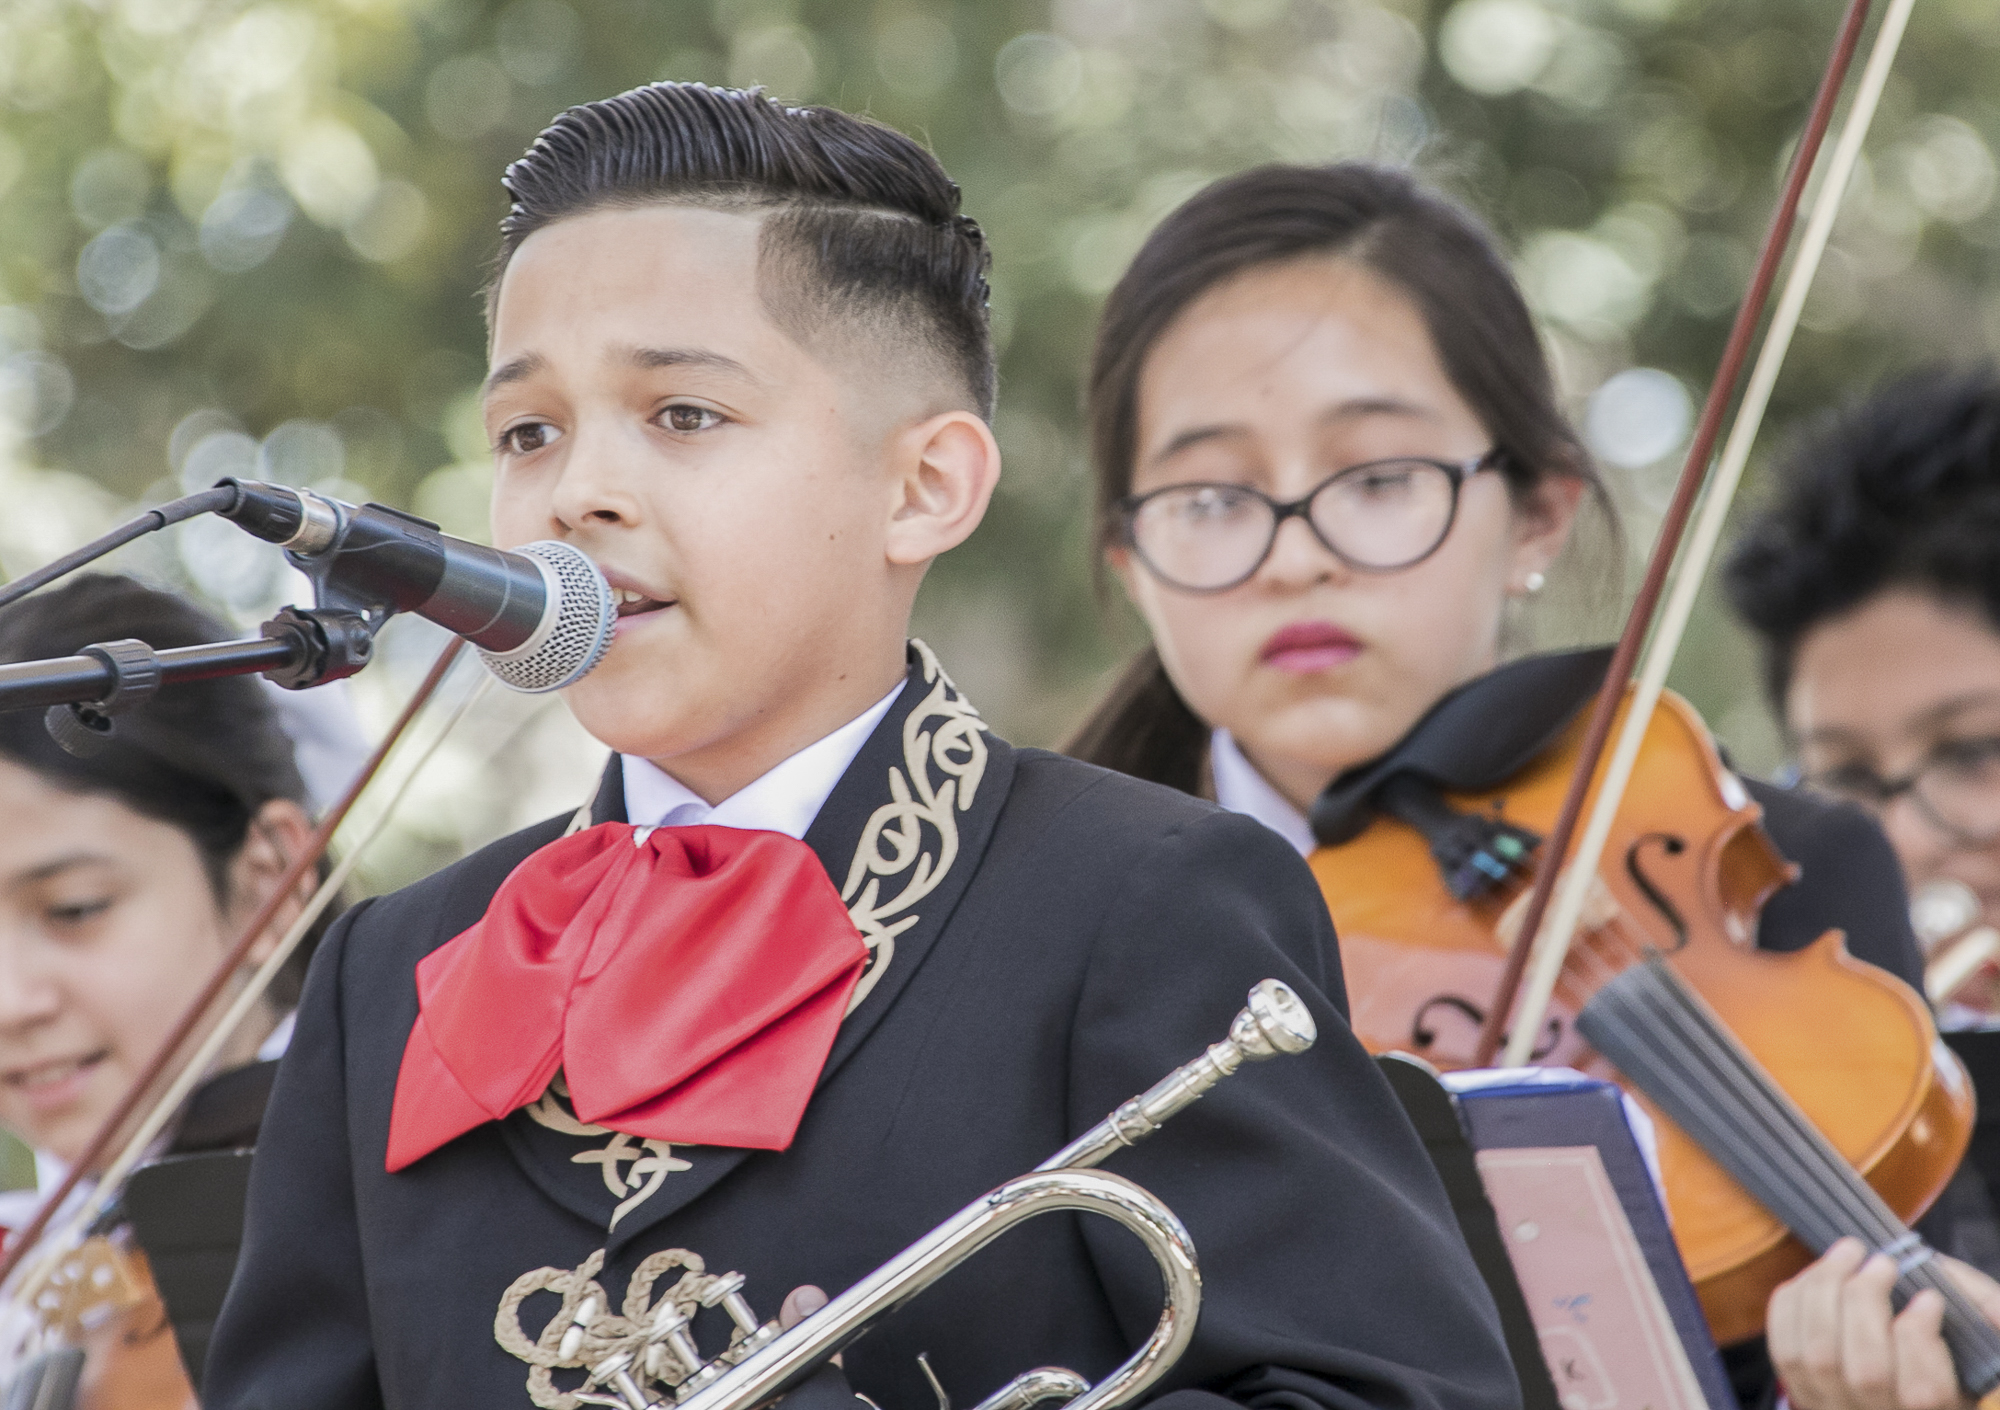  The mariachi band for Cinco De Mayo celebrations at El Pueblo de Los Angeles Historic Monument at Olvera Street on May 5th, 2018 was performed by students from a local middle school.  (Downtown, Los Angeles, California, Saturday, May 5th, 2018.) (As